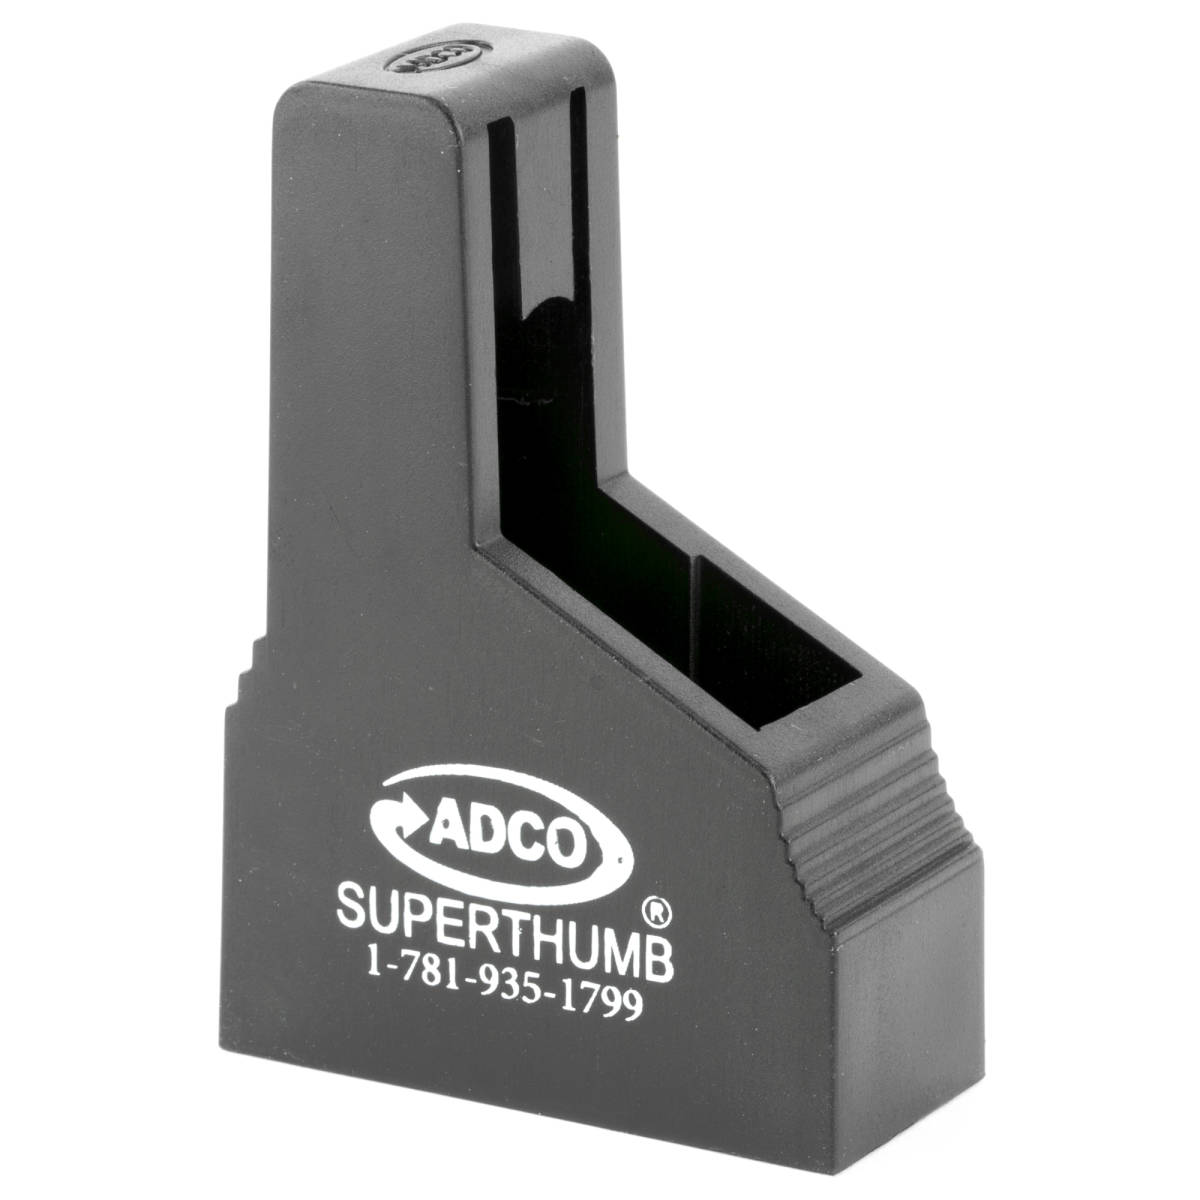 ADCO ST6 Super Thumb Mag Loader Single Stack Style, Black Polymer, For...-img-1